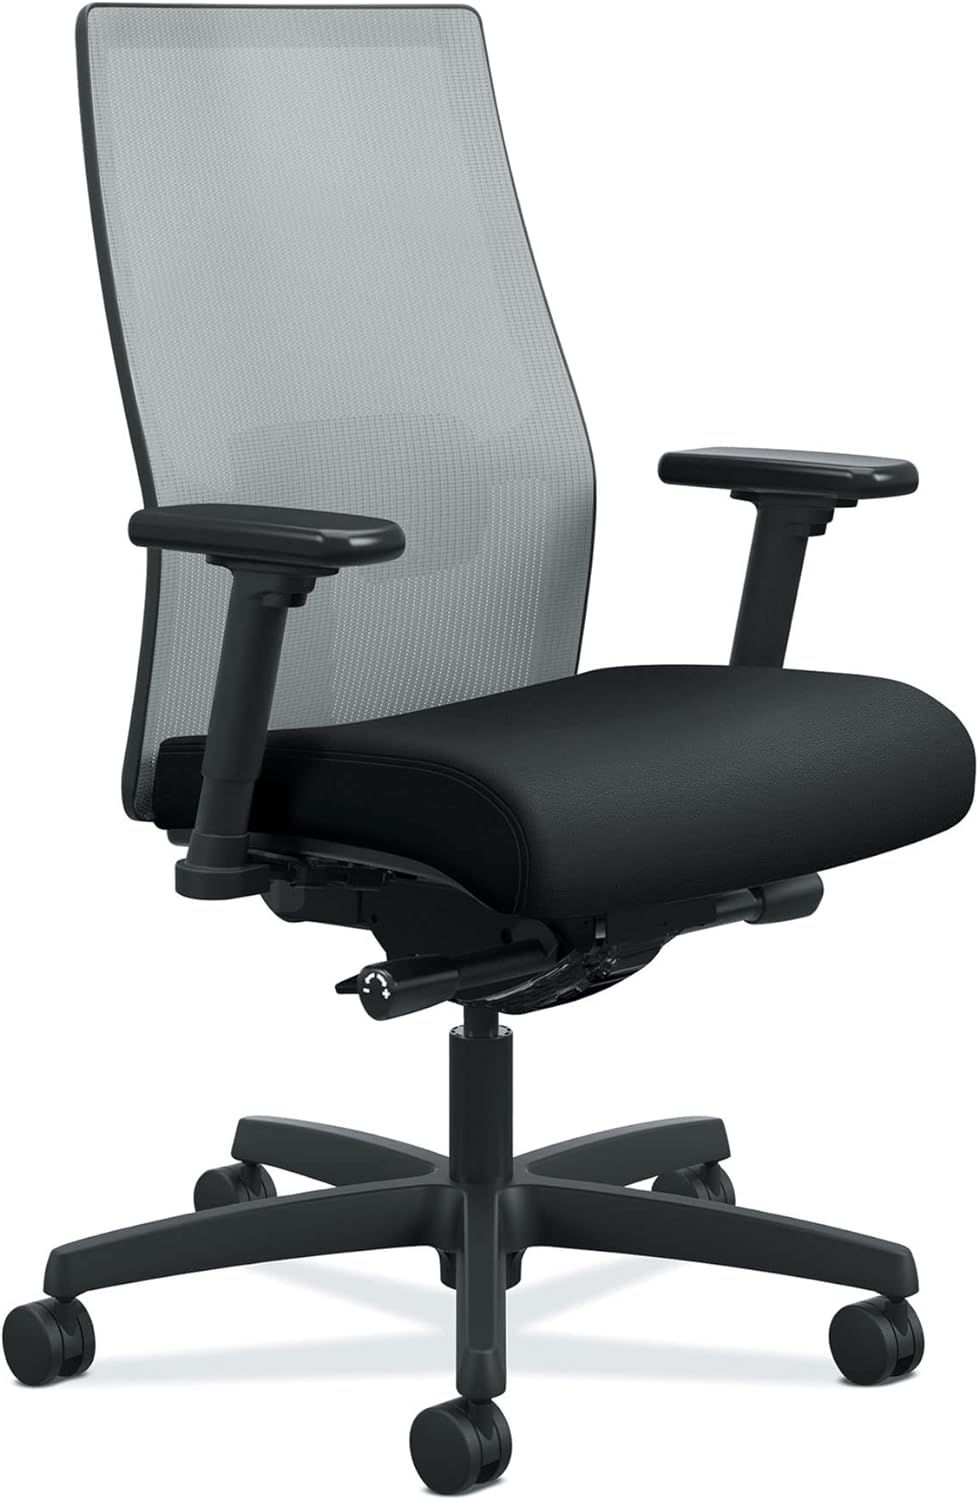 HON Ignition 2.0 Ergonomic Office Chair Mesh Back Computer Chair - Synchro-Tilt Recline, Lumbar Support, Swivel Wheels, Comfortable for Long Hours in Home Office & Task Work, Executive - Grey